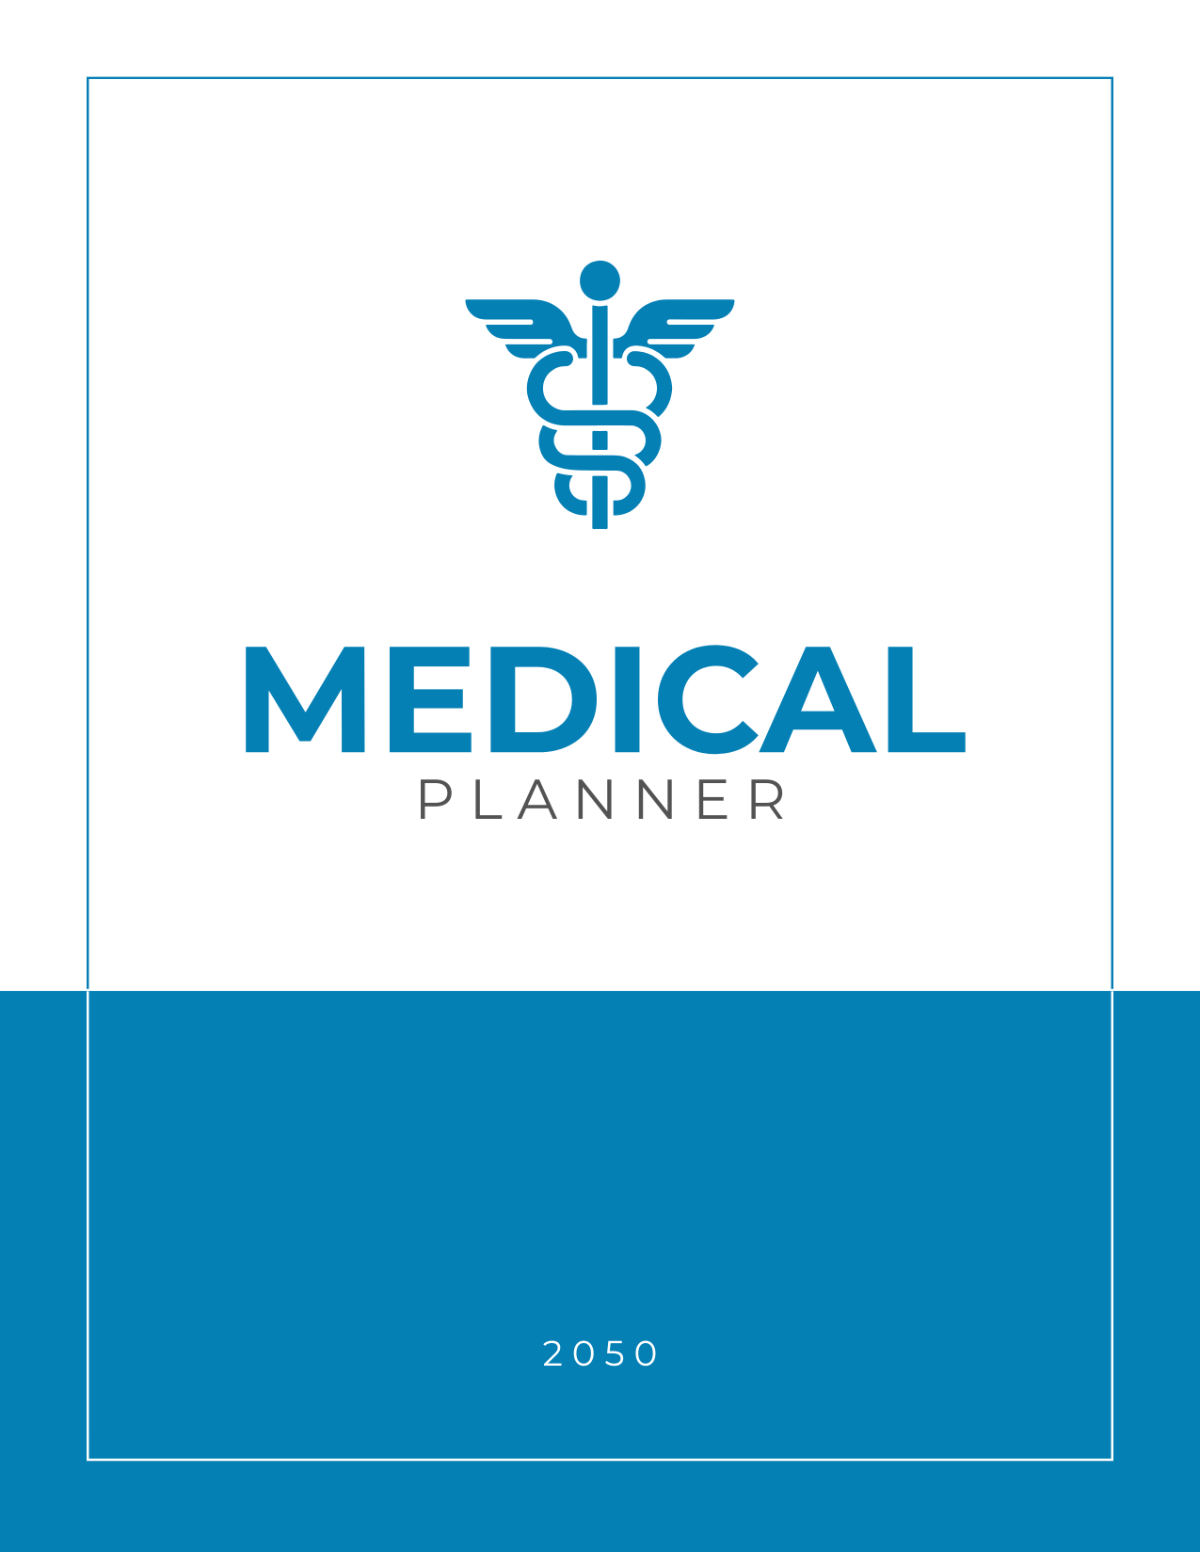 Free Medical Planner Template